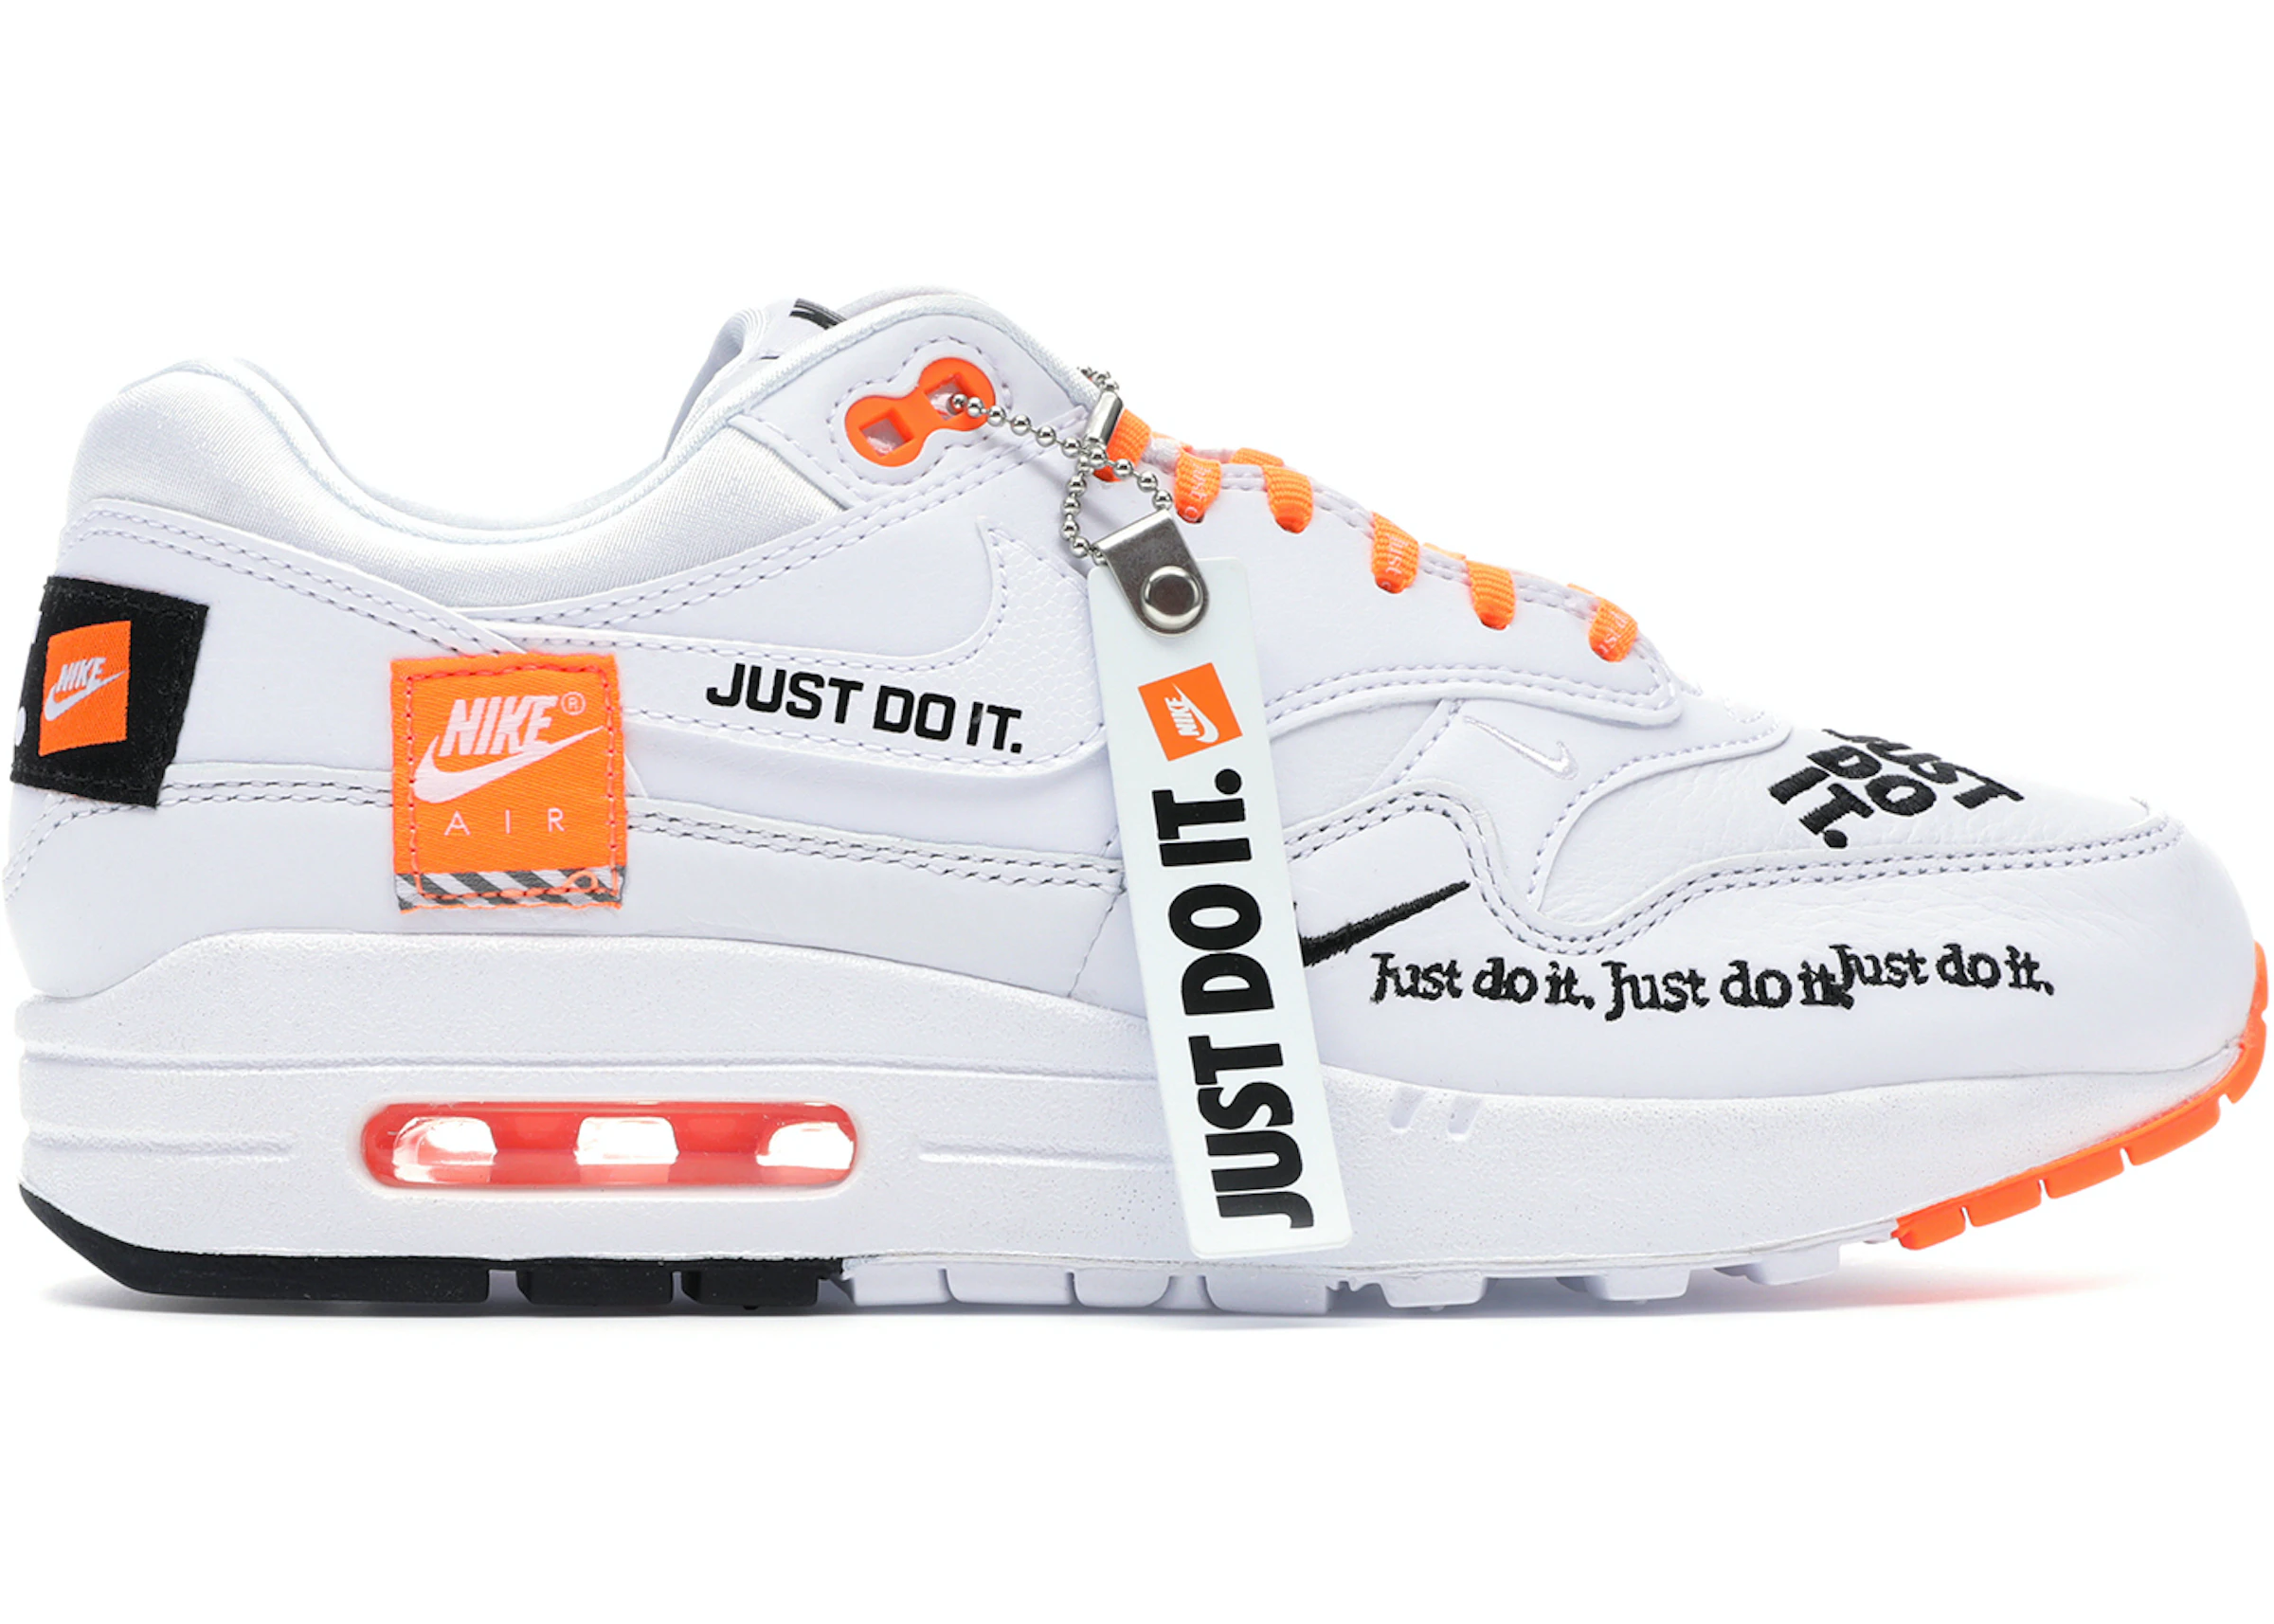 Serrated diamond Country of Citizenship Nike Air Max 1 Just Do It White (W) - 917691-100 - US